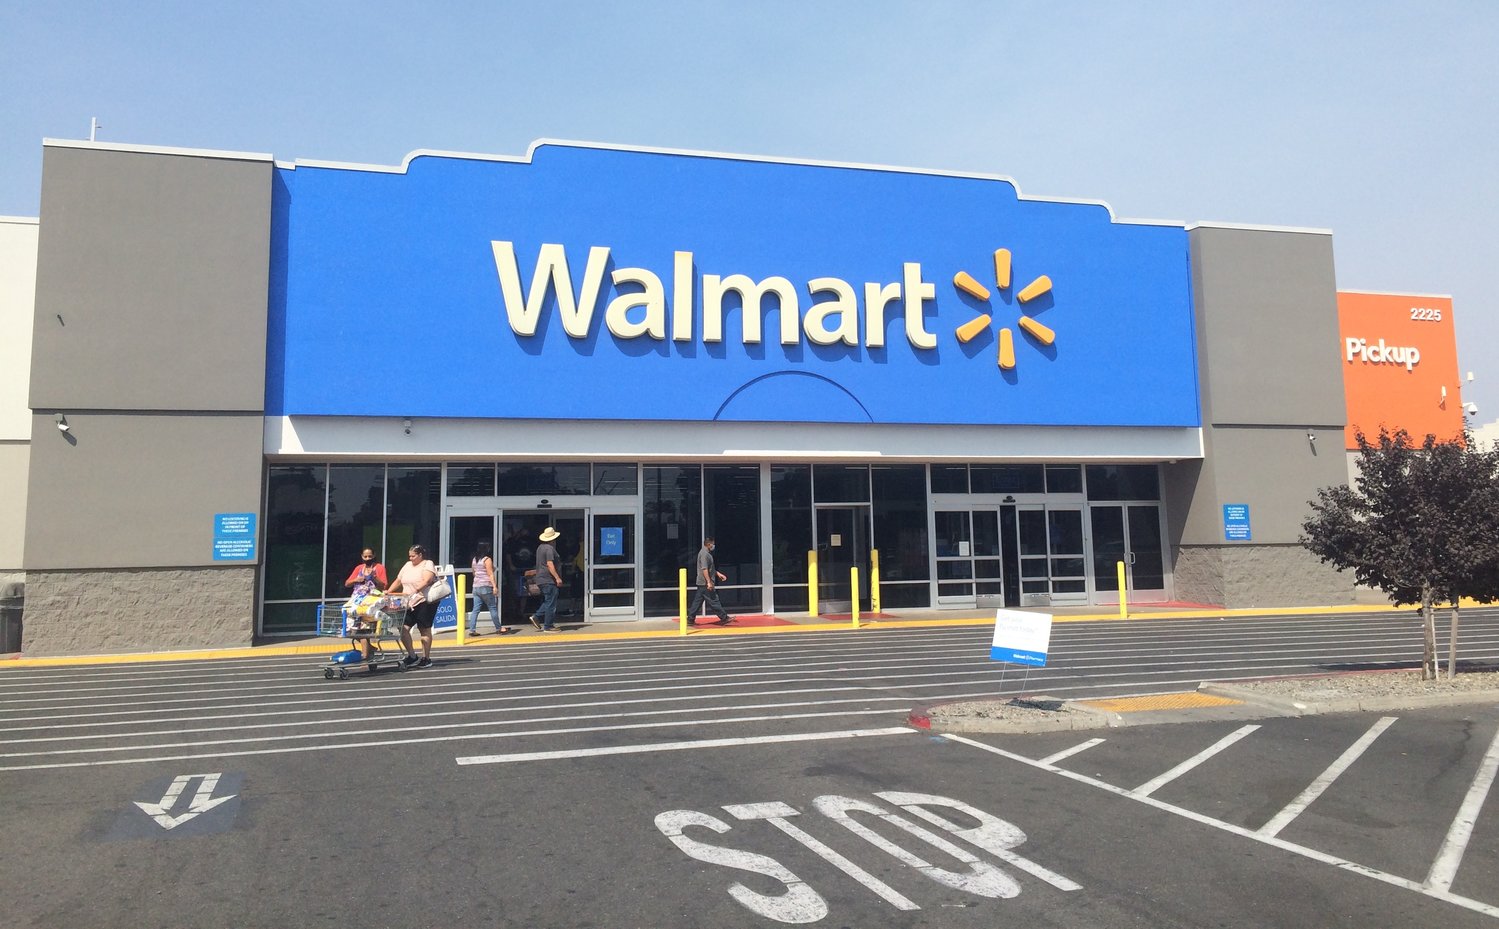 Walmart and Sam's Club are owed refunds from Lansing Township for improper tax assessments.